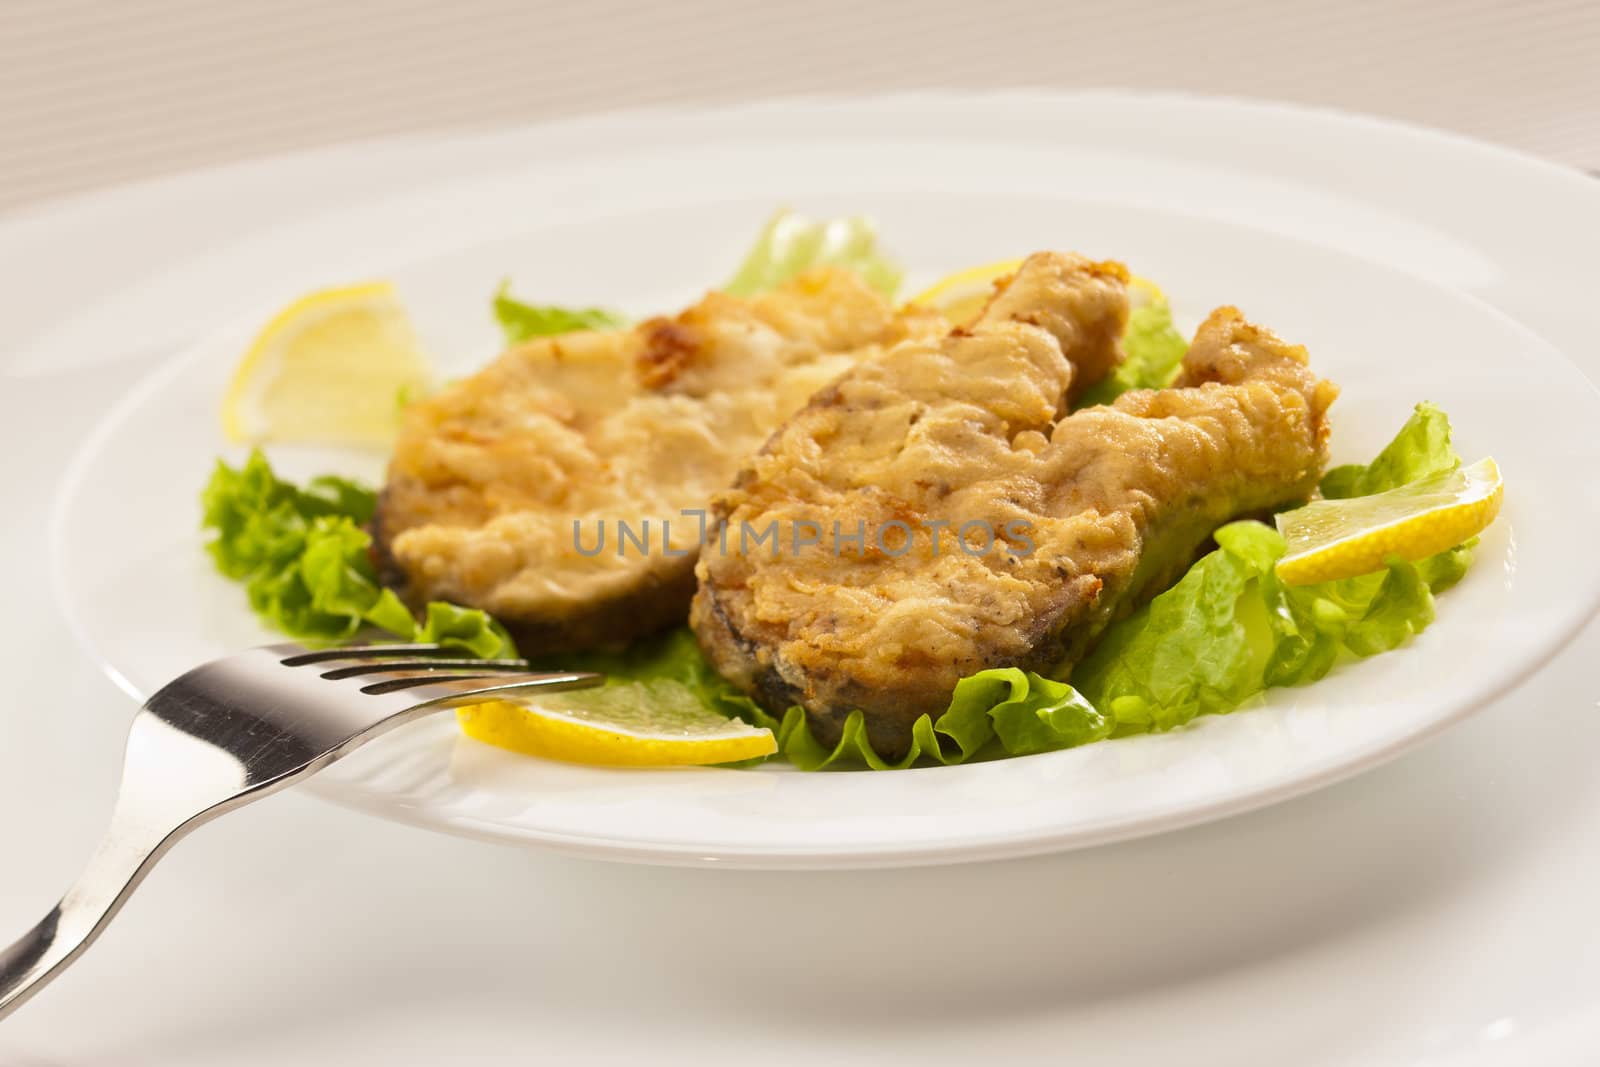 food series: freshfried fish with lettuce and lemon